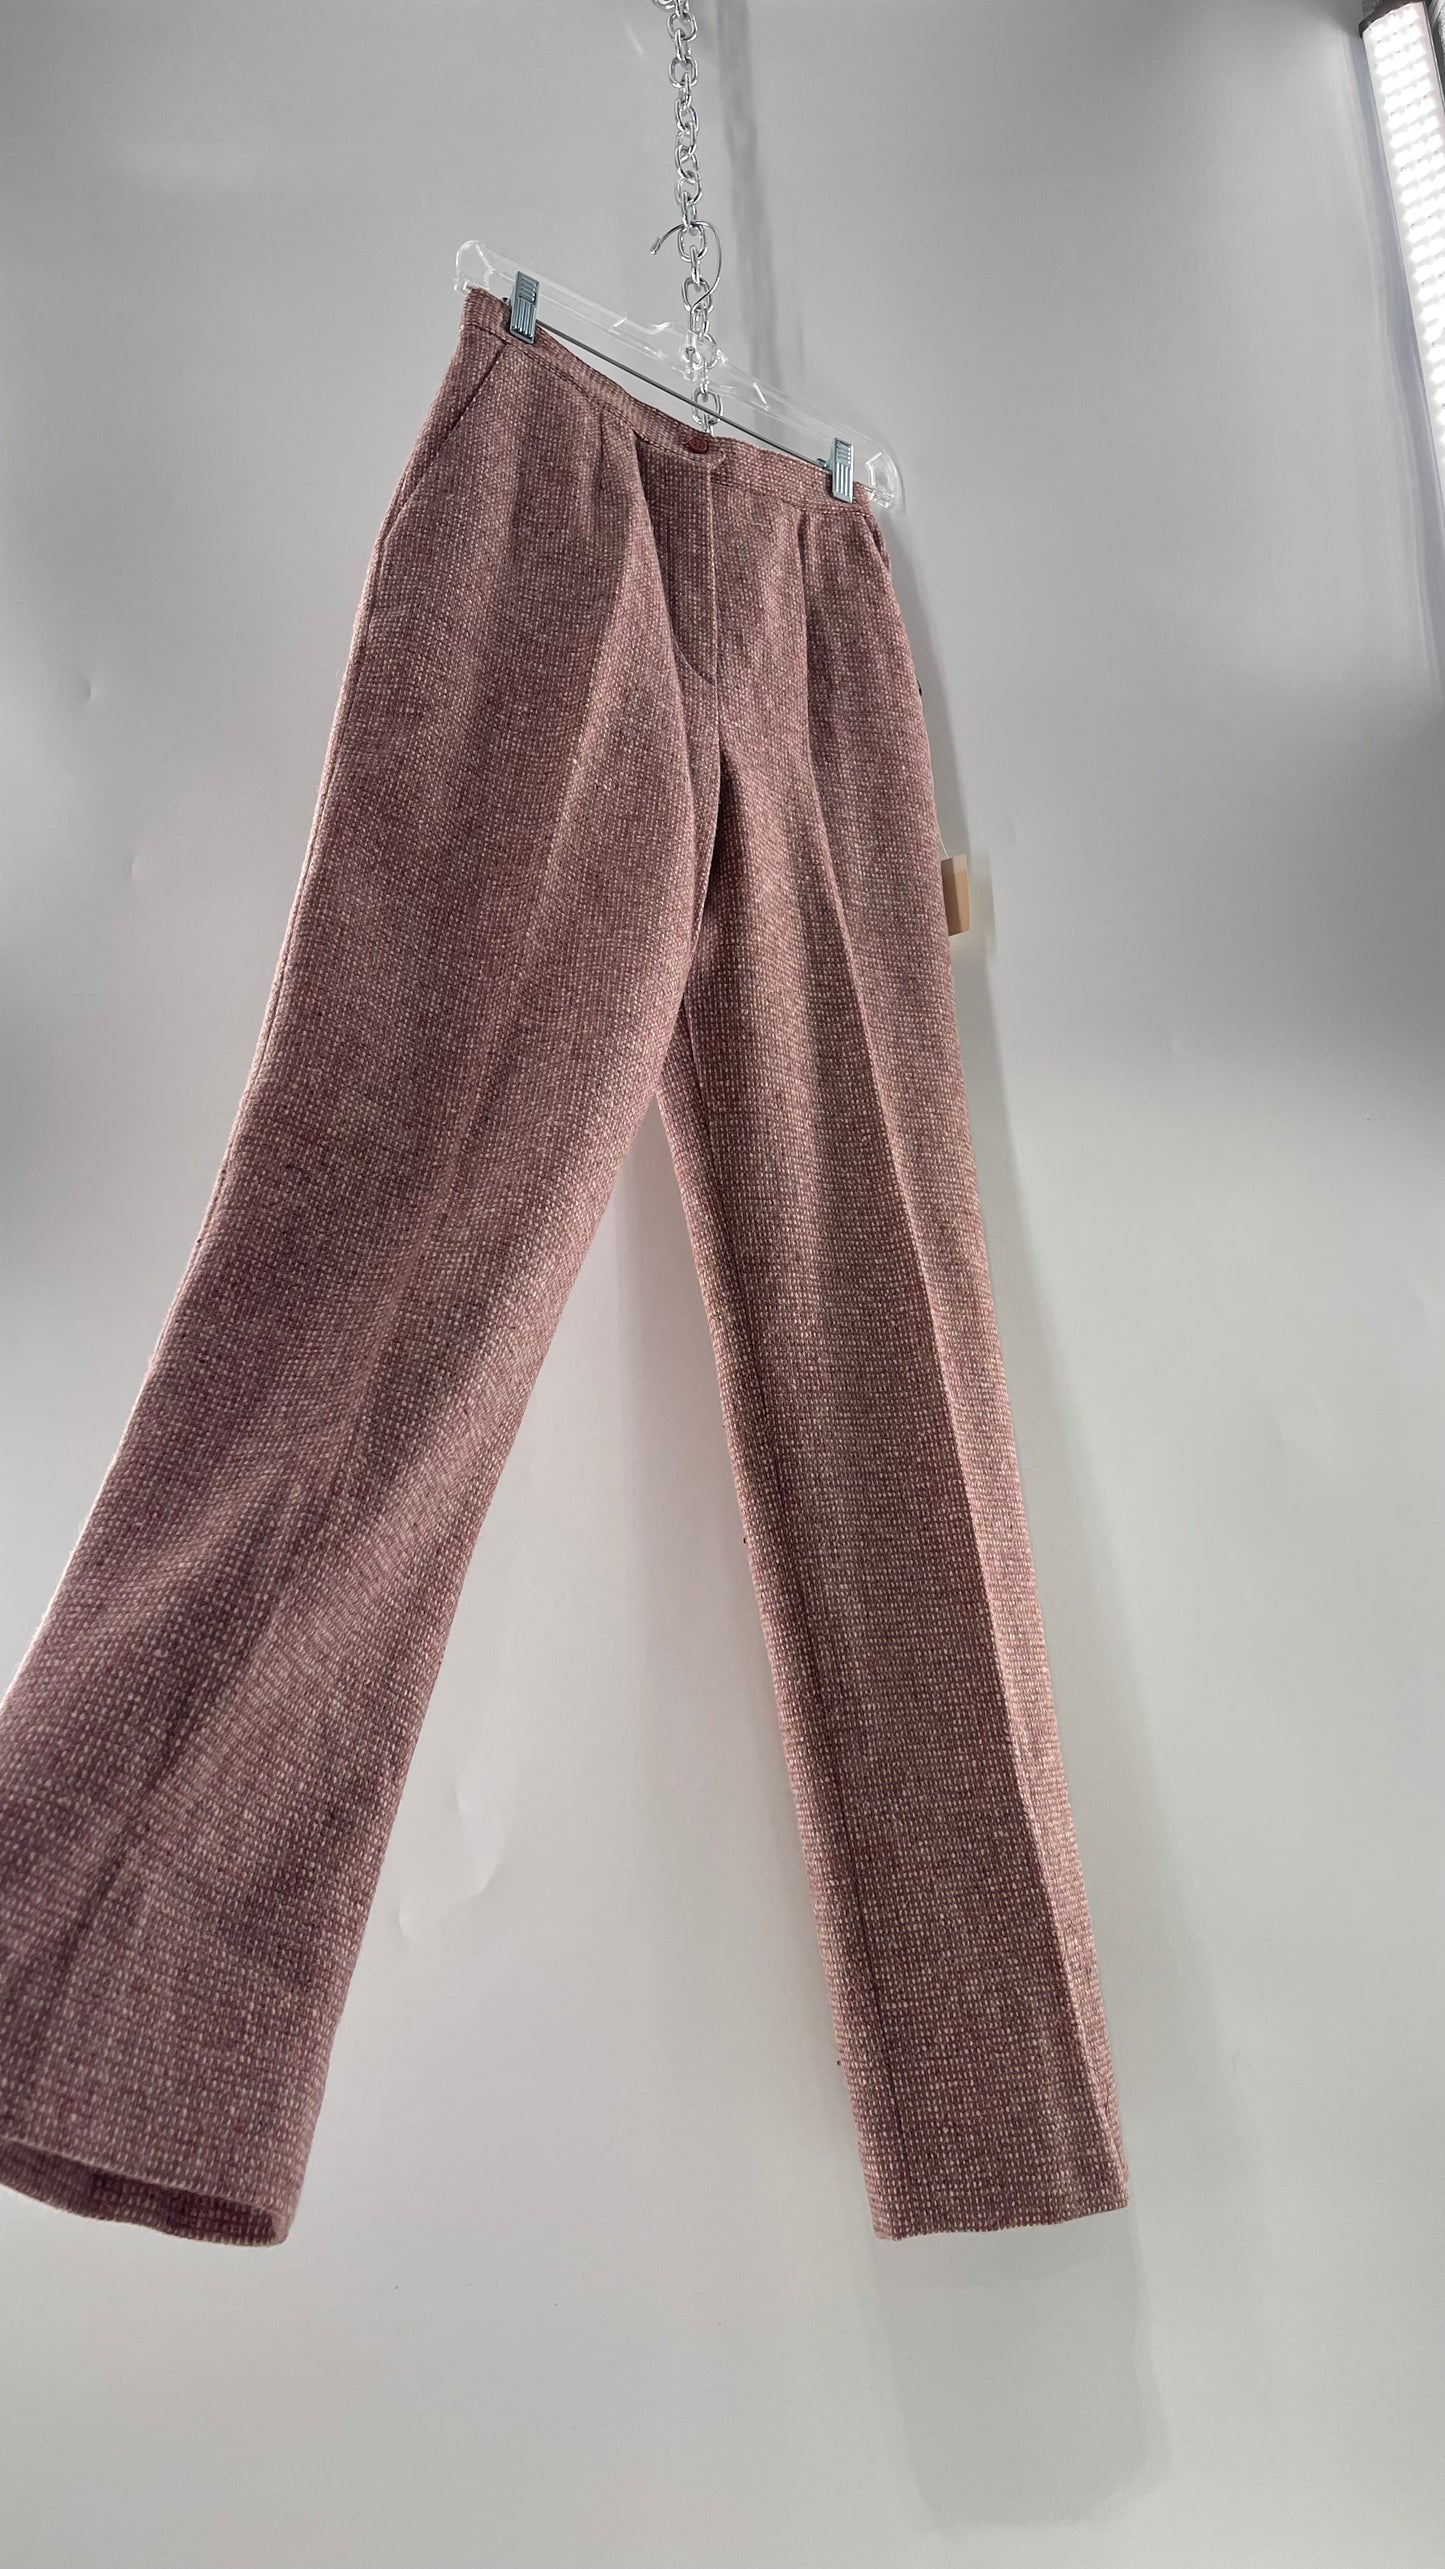 Deadstock Tanner Tweed Sport Vintage Pink Wool Trouser with Tags Attached (8)